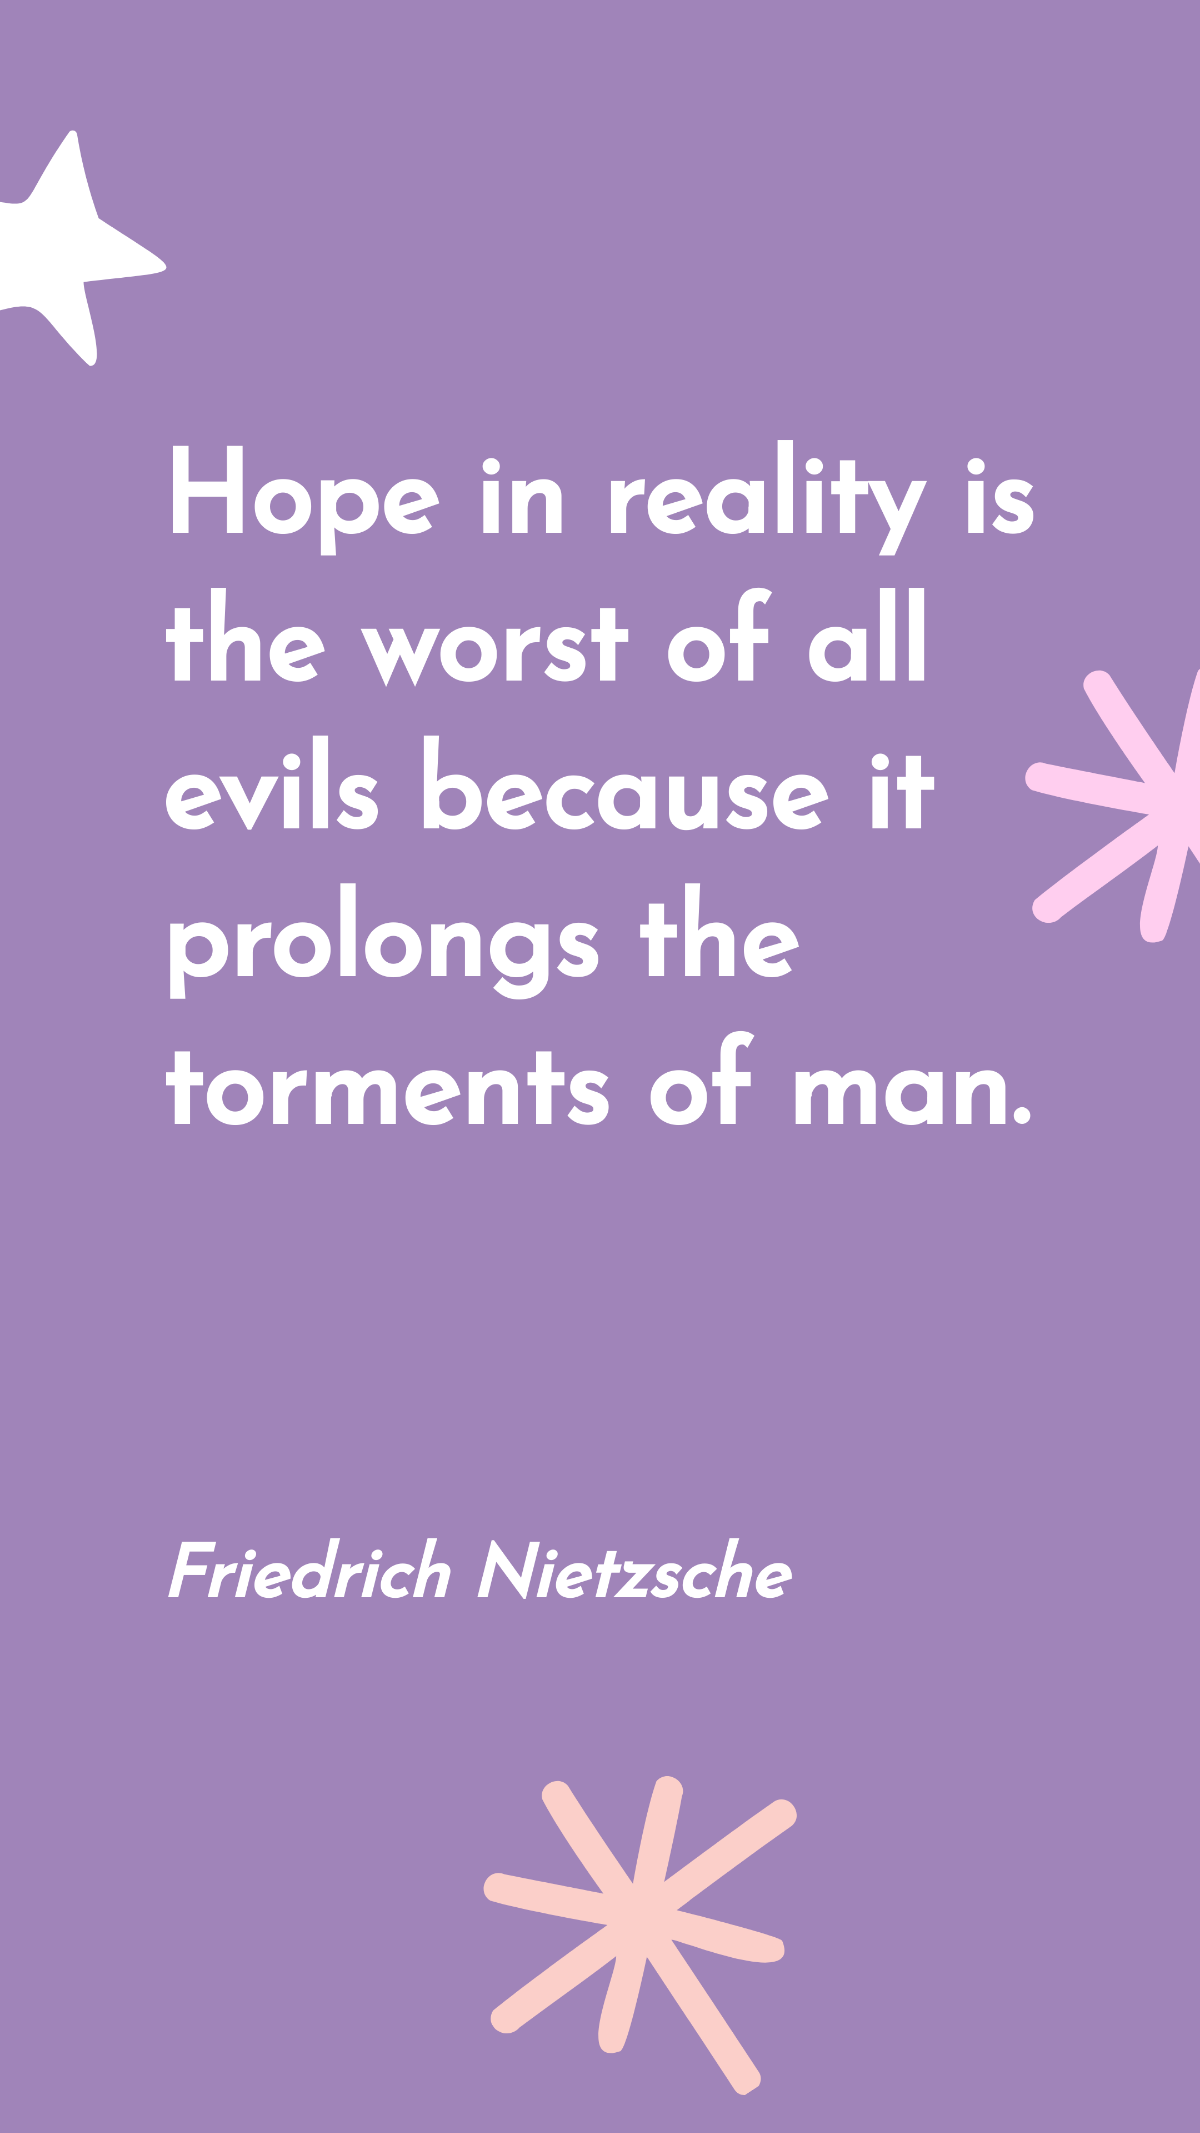 Friedrich Nietzsche - Hope in reality is the worst of all evils because it prolongs the torments of man.